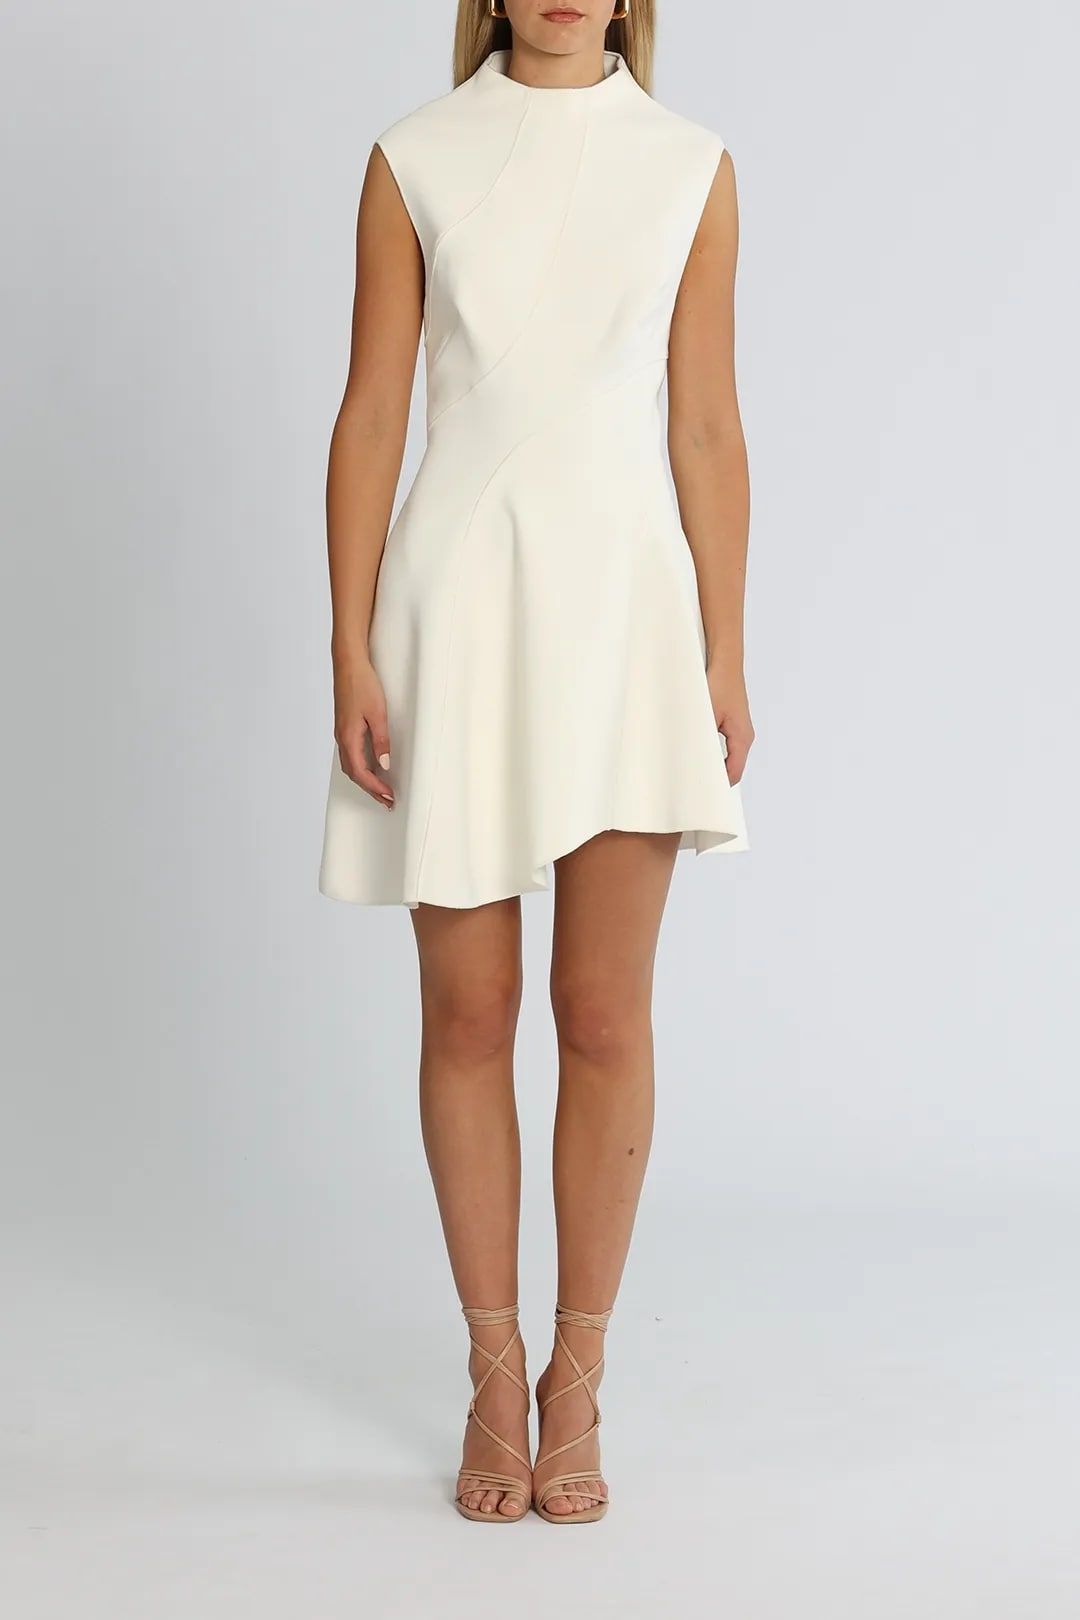 Acler Sinclair Dress in Ivory, perfect for weddings, available for hire